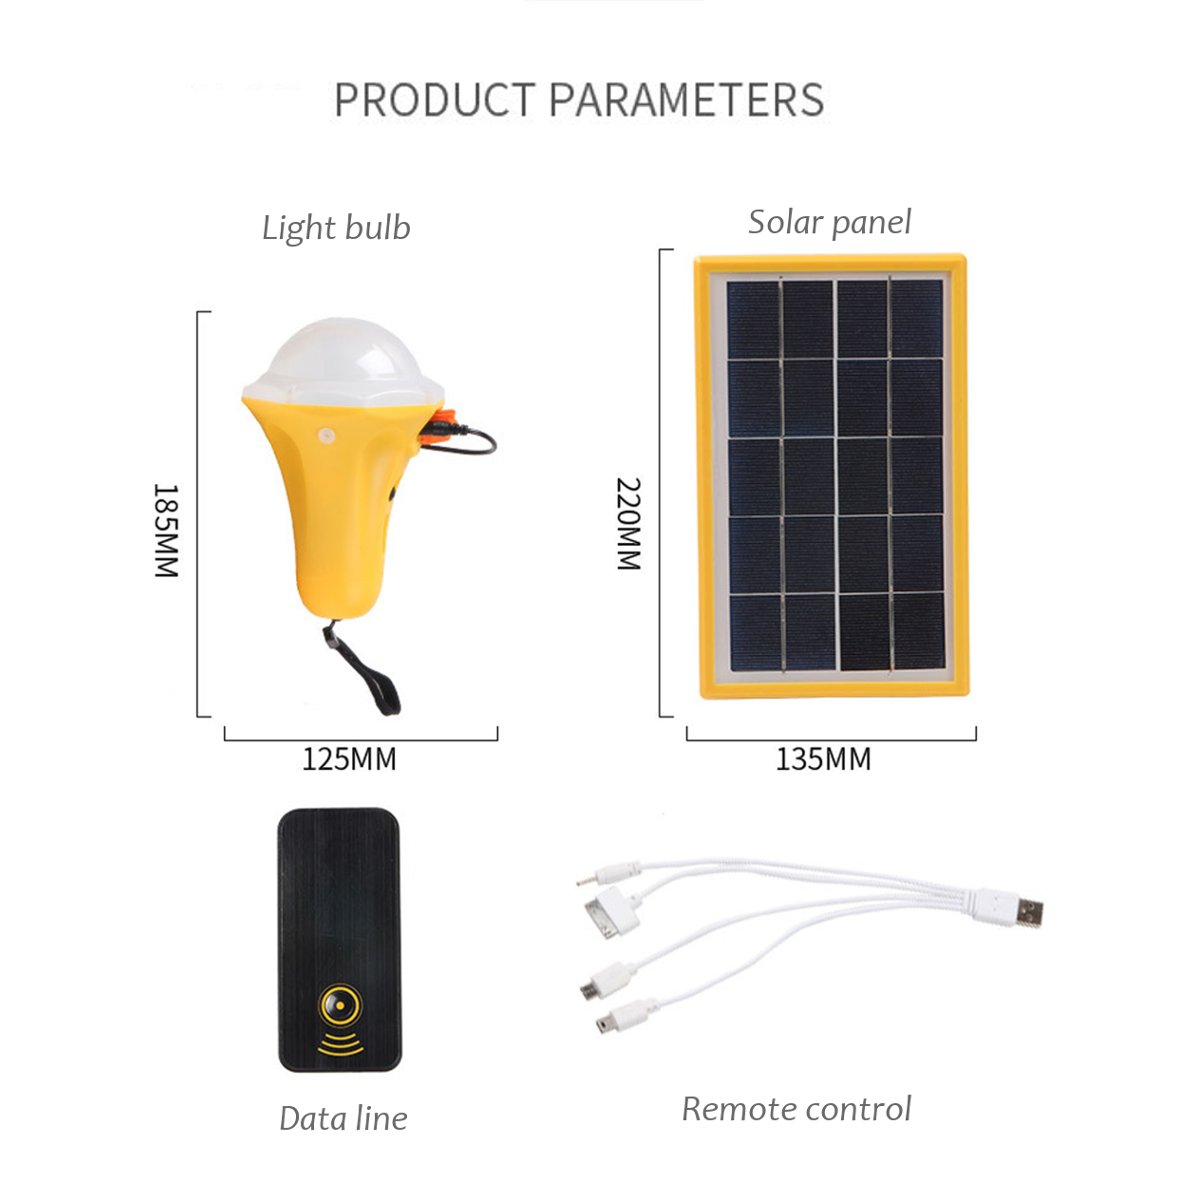 200LM-Solar-Panel-Bulb-Power-5-Modes-DC-Lighting-System-Kits-Emergency-Generator-With-Remote-Control-1460417-6